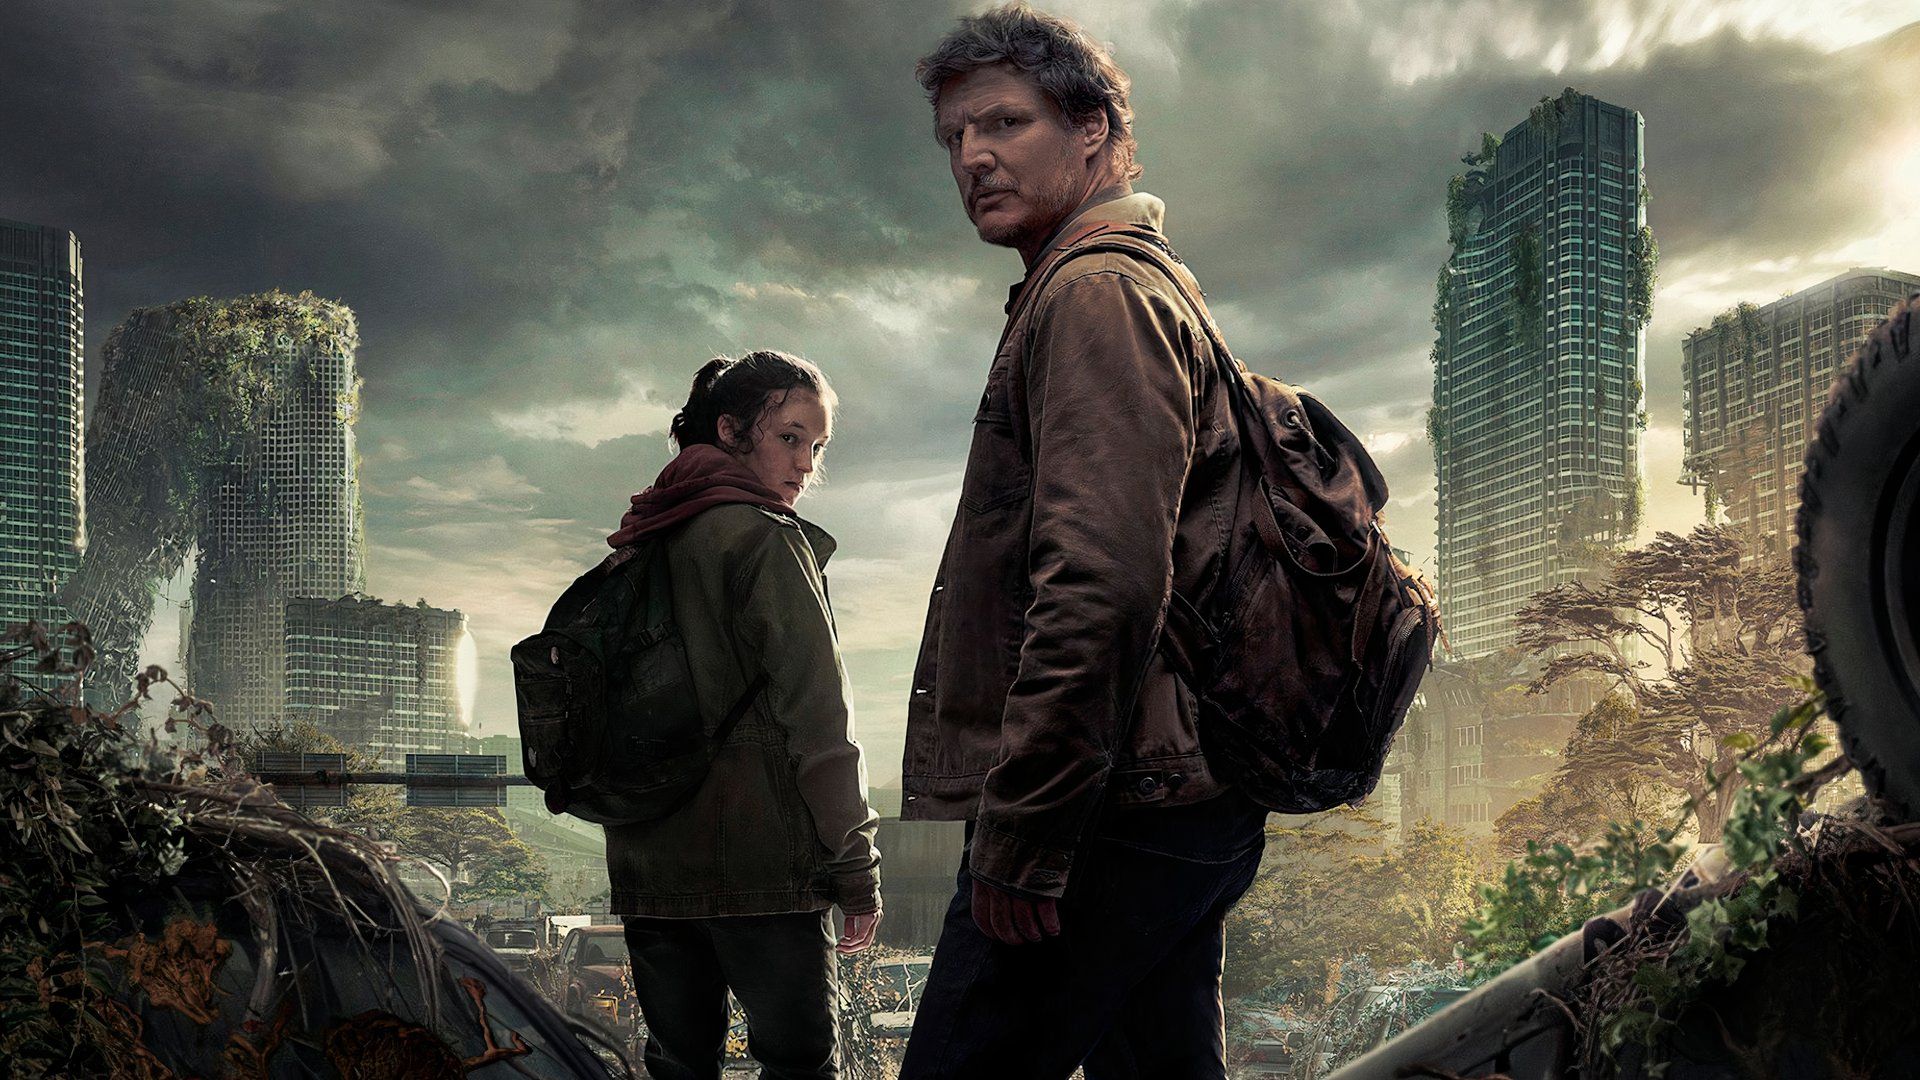 Pedro Pascal and Bella Ramsey in The Last of Us